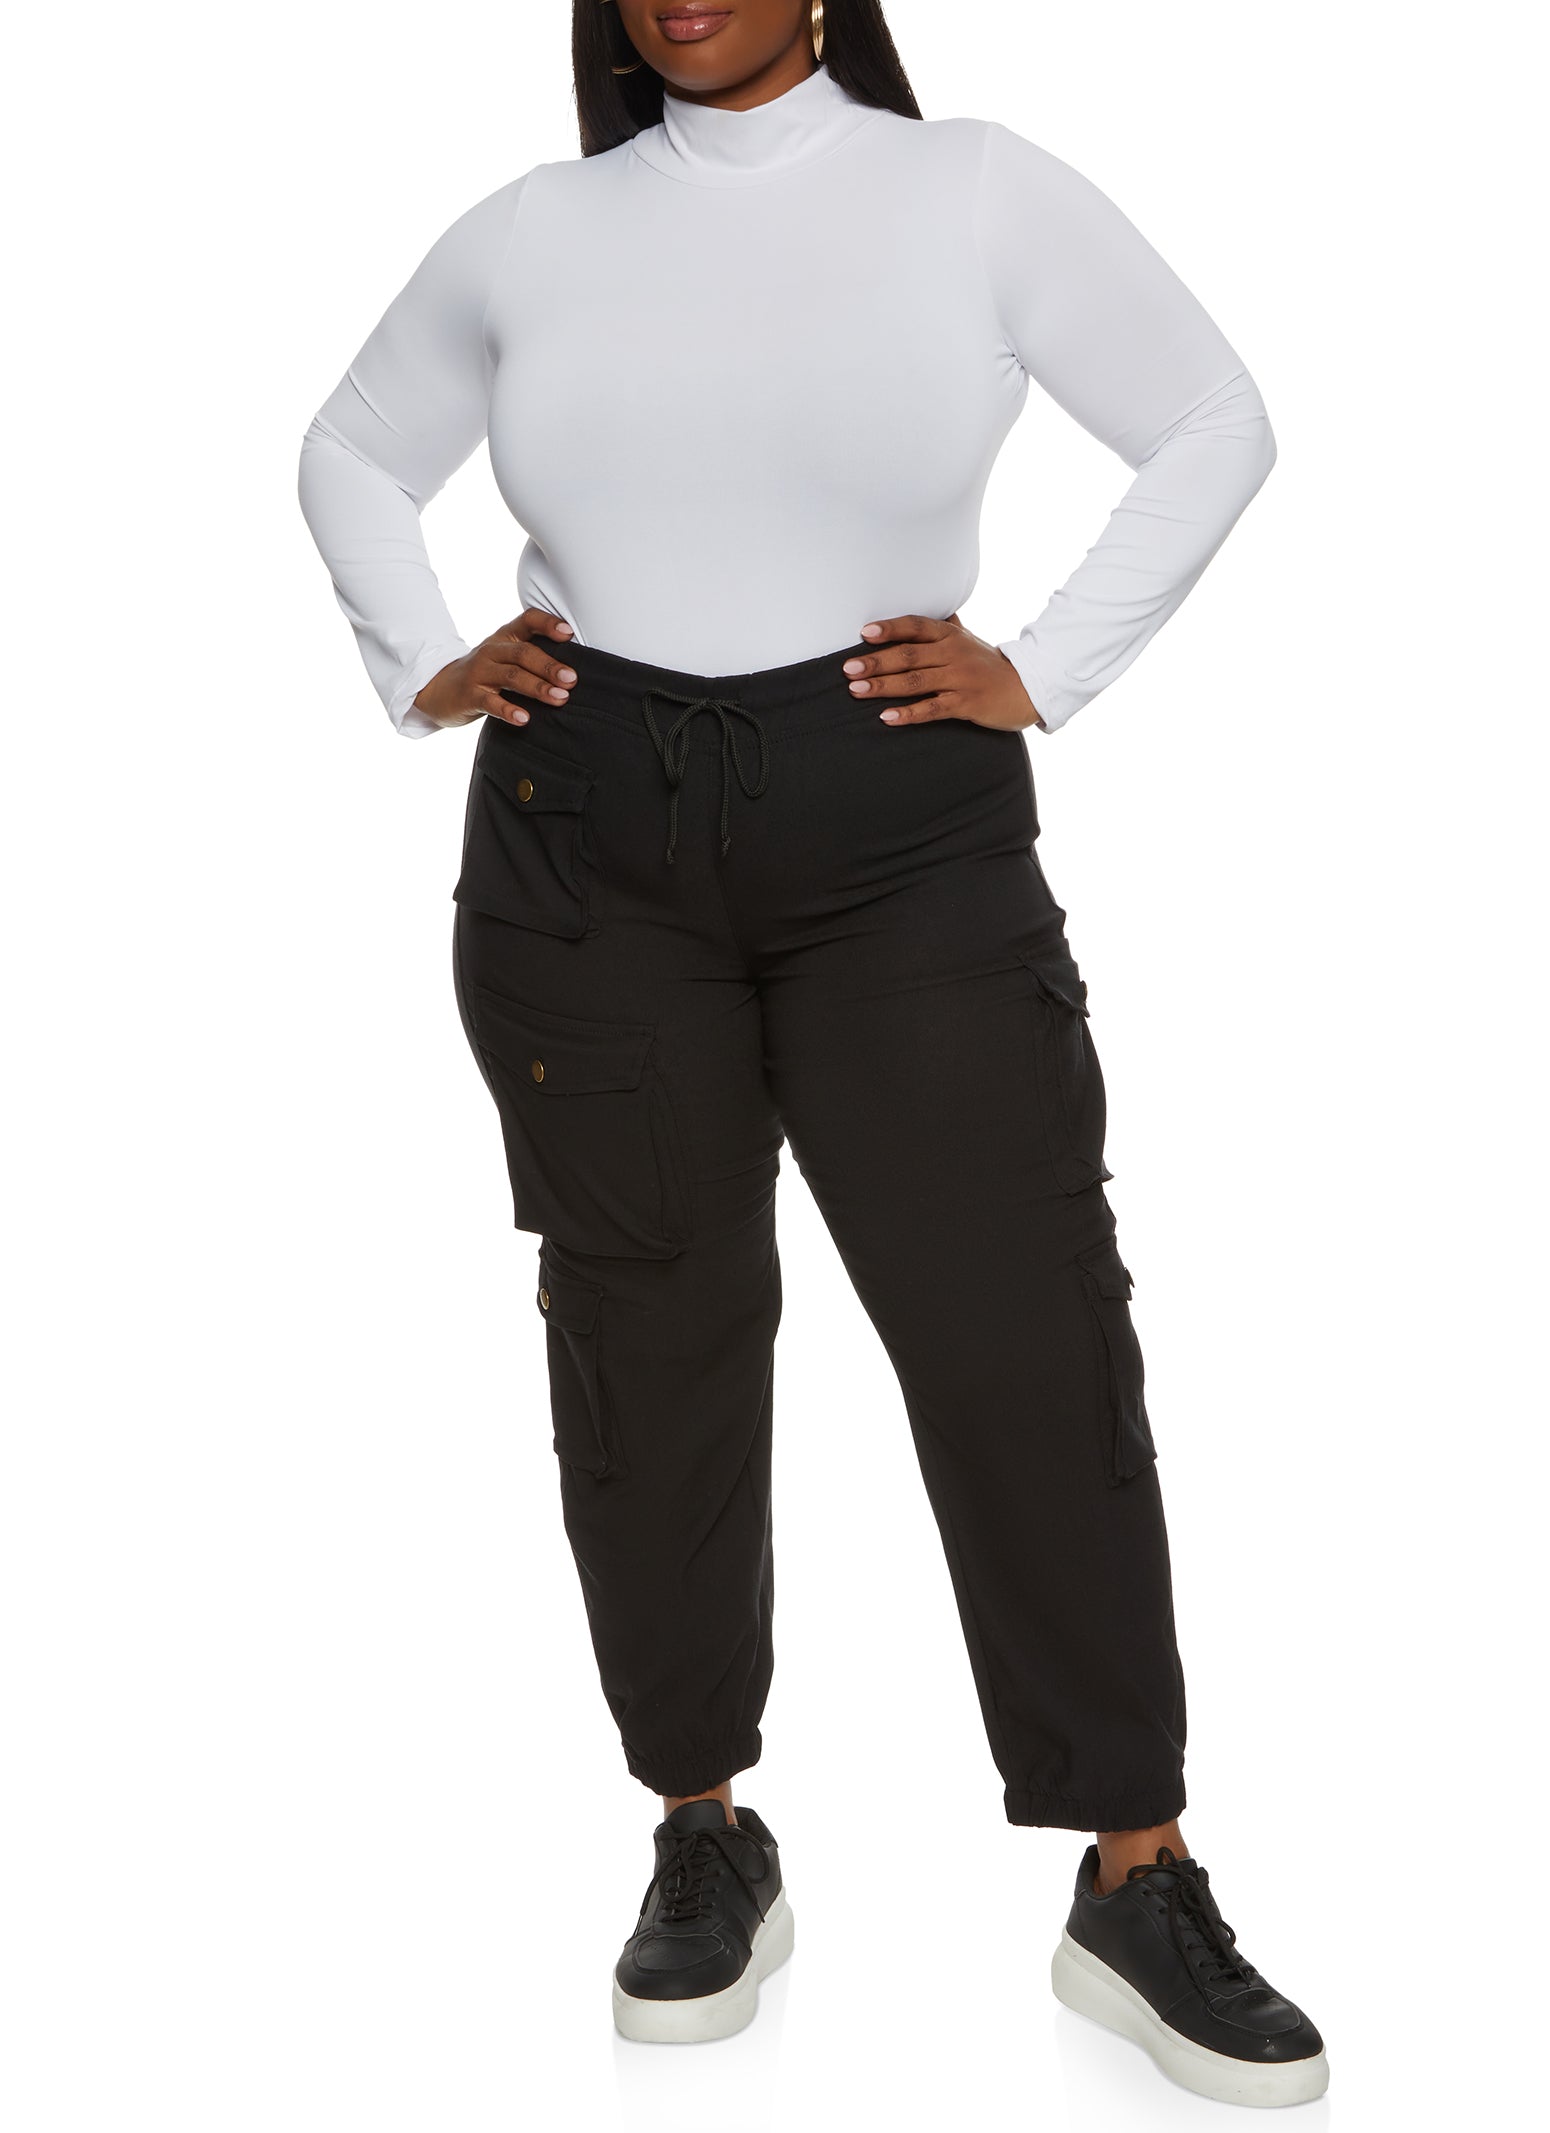 Plus Size Hyperstretch Cargo Pocket Joggers